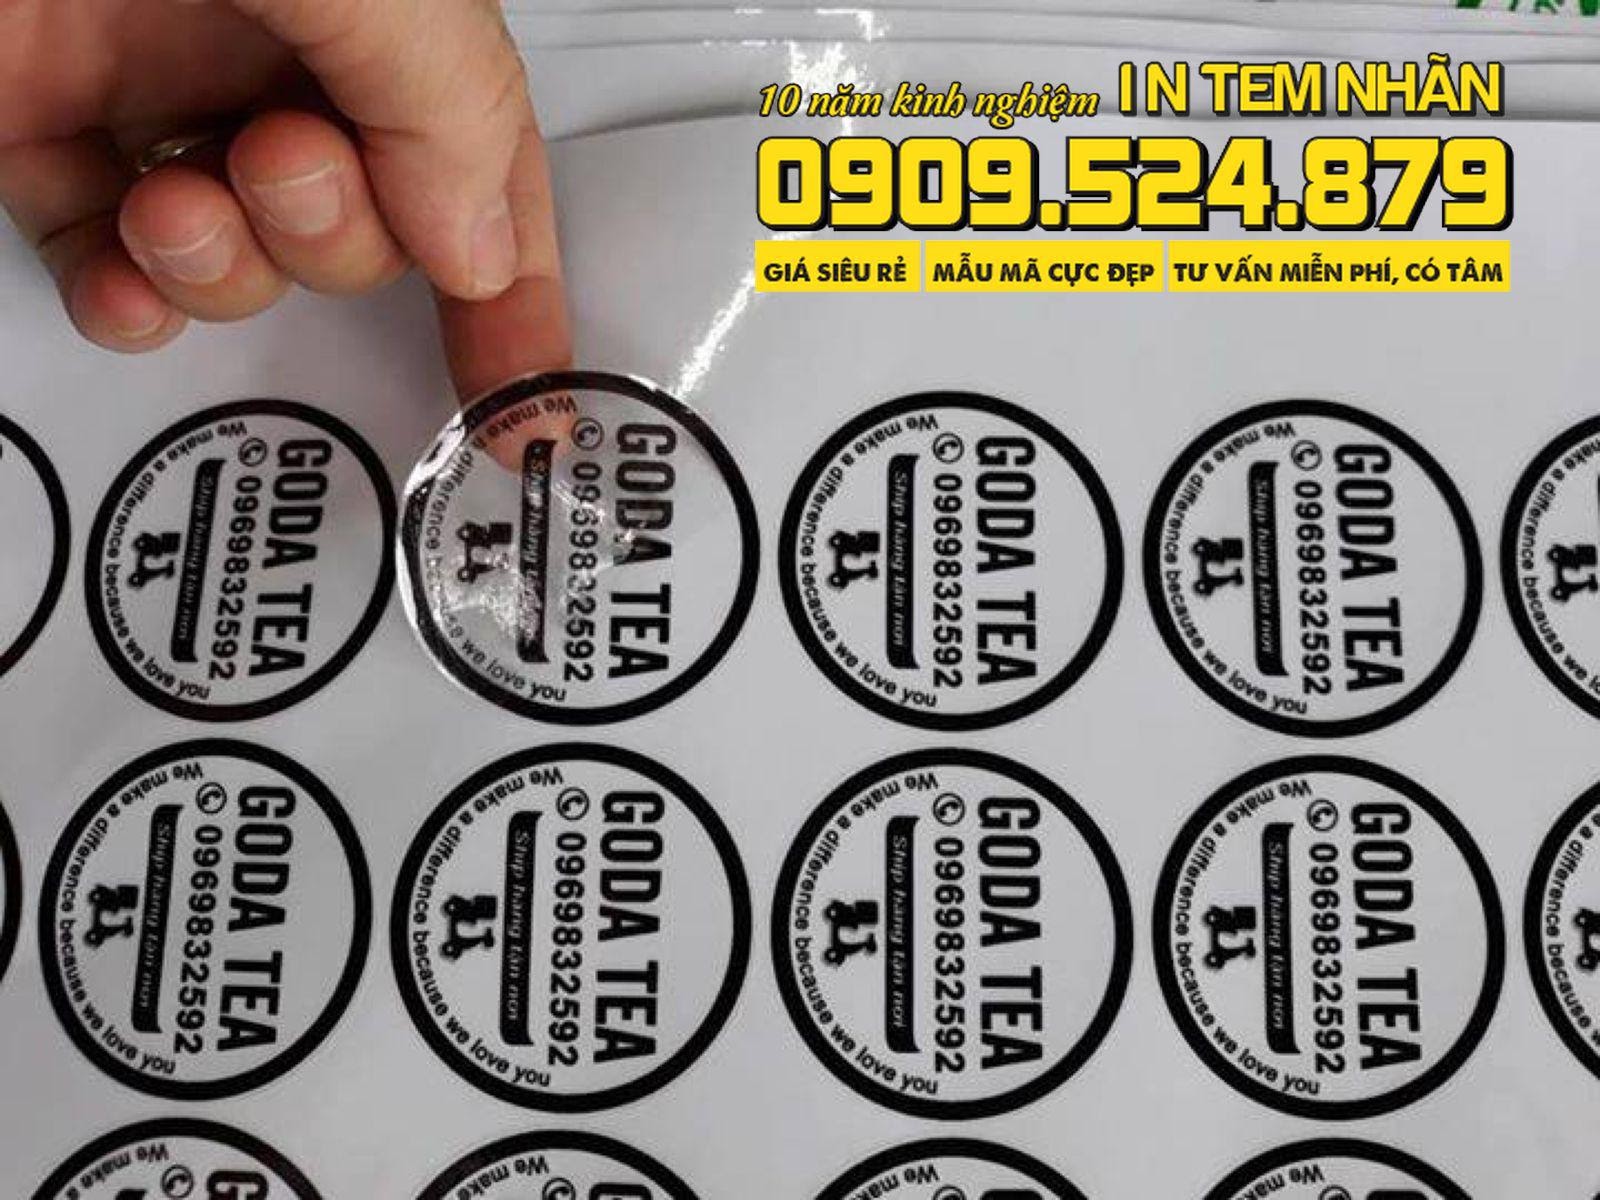 IN TEM DECAL TRONG SUOT0055 8